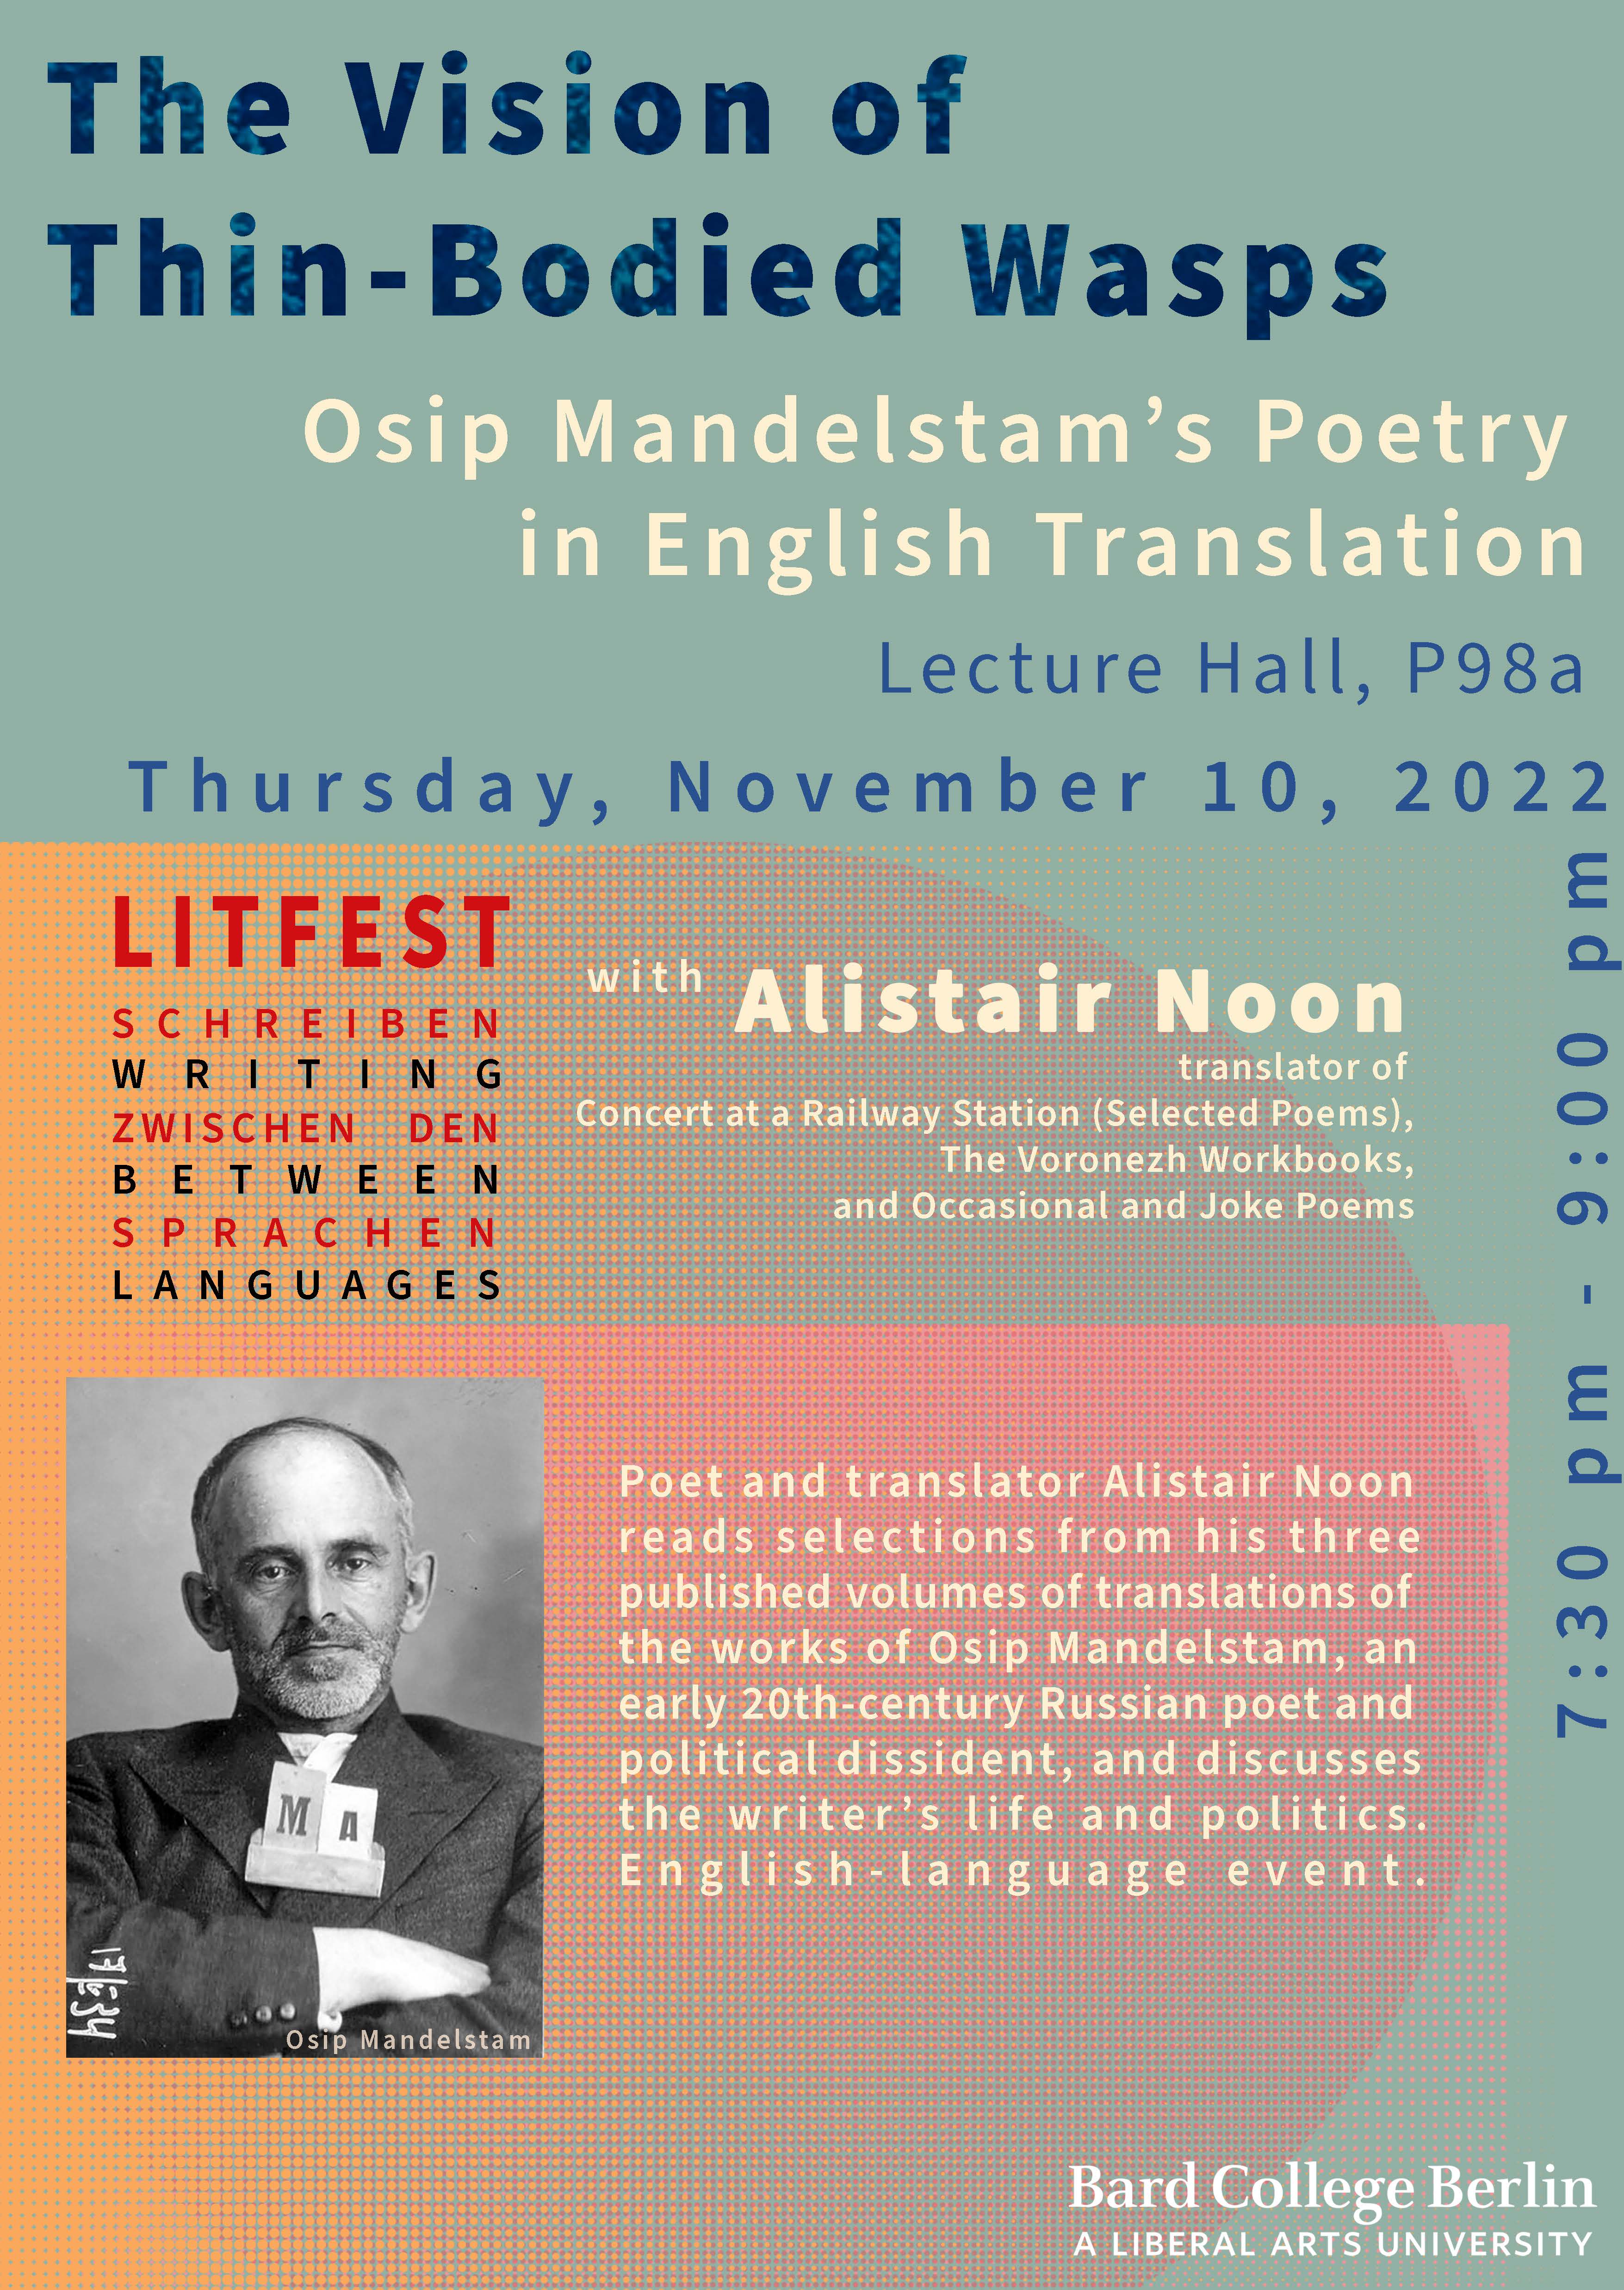 The Vision of Thin-Bodied Wasps: Osip Mandelstam&rsquo;s Poetry in English Translation